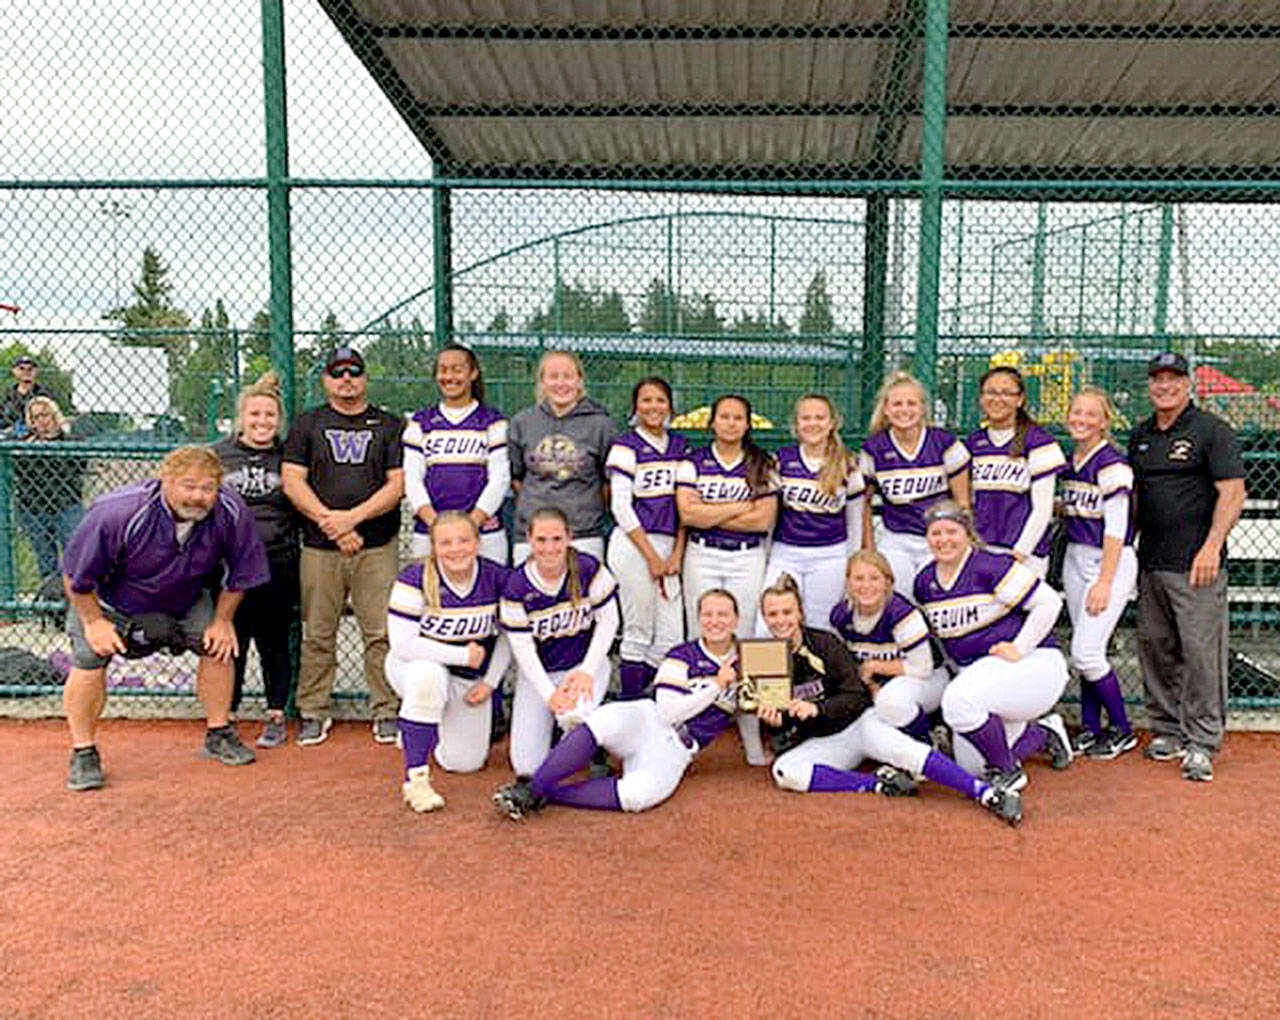 Sequim players celebrate a second-place finish at the West Central District tournament last week, going 3-1 and earning a spot in the class 2A state tournament. Submitted photo